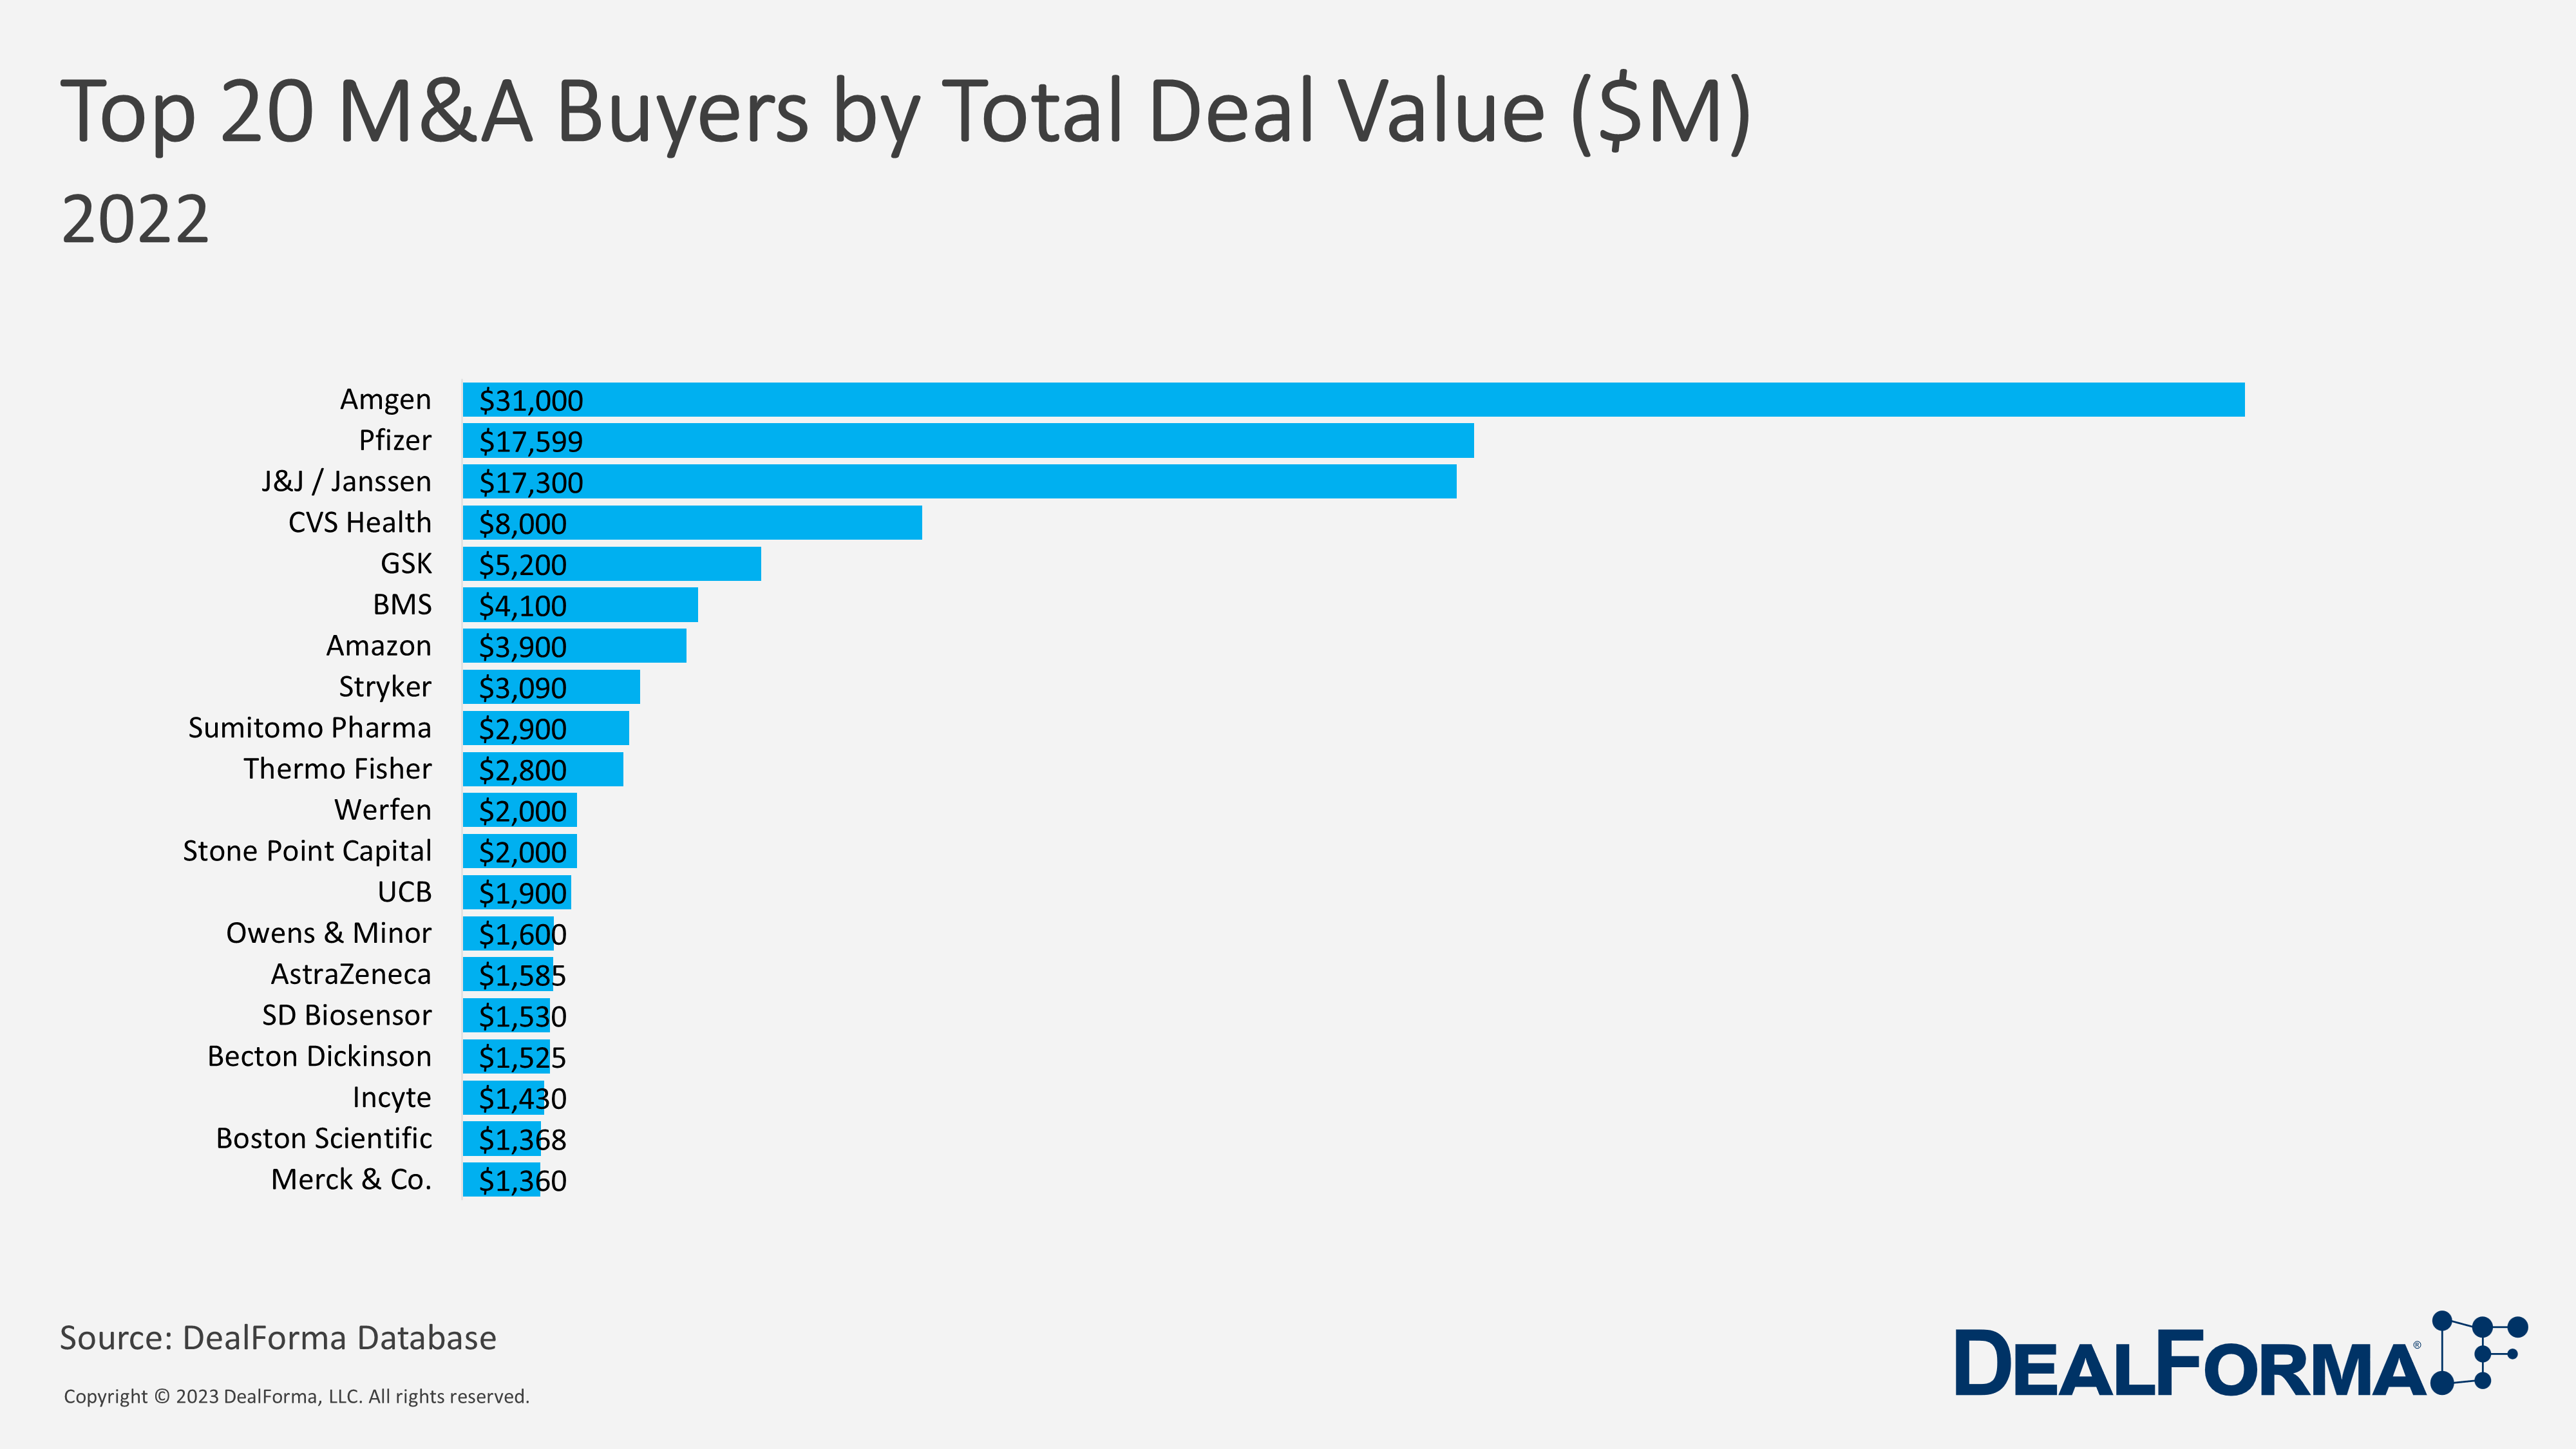 Top 20 M&A Buyers by Total Deal Value